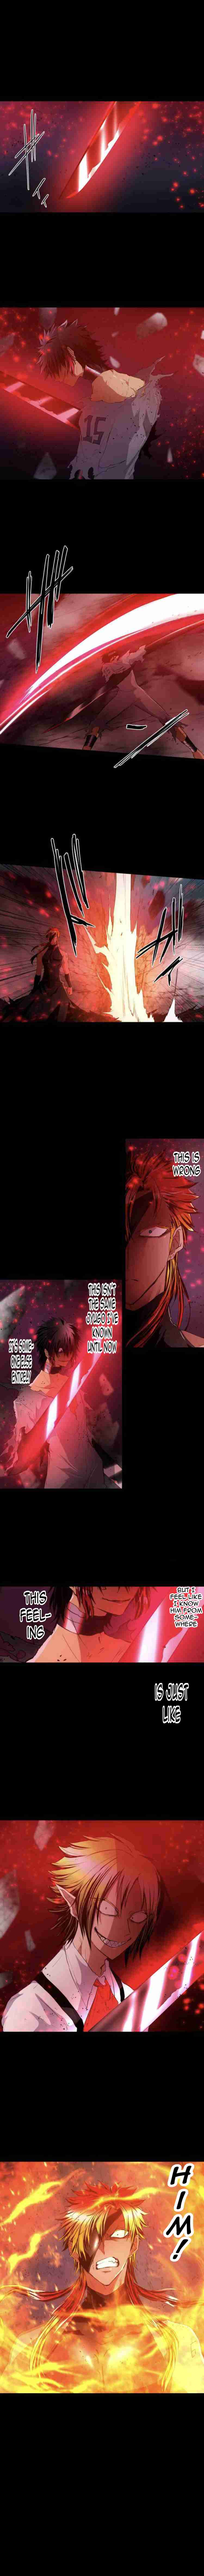 Nanbaka Ch. 185 The Shackle and Flame's Scars